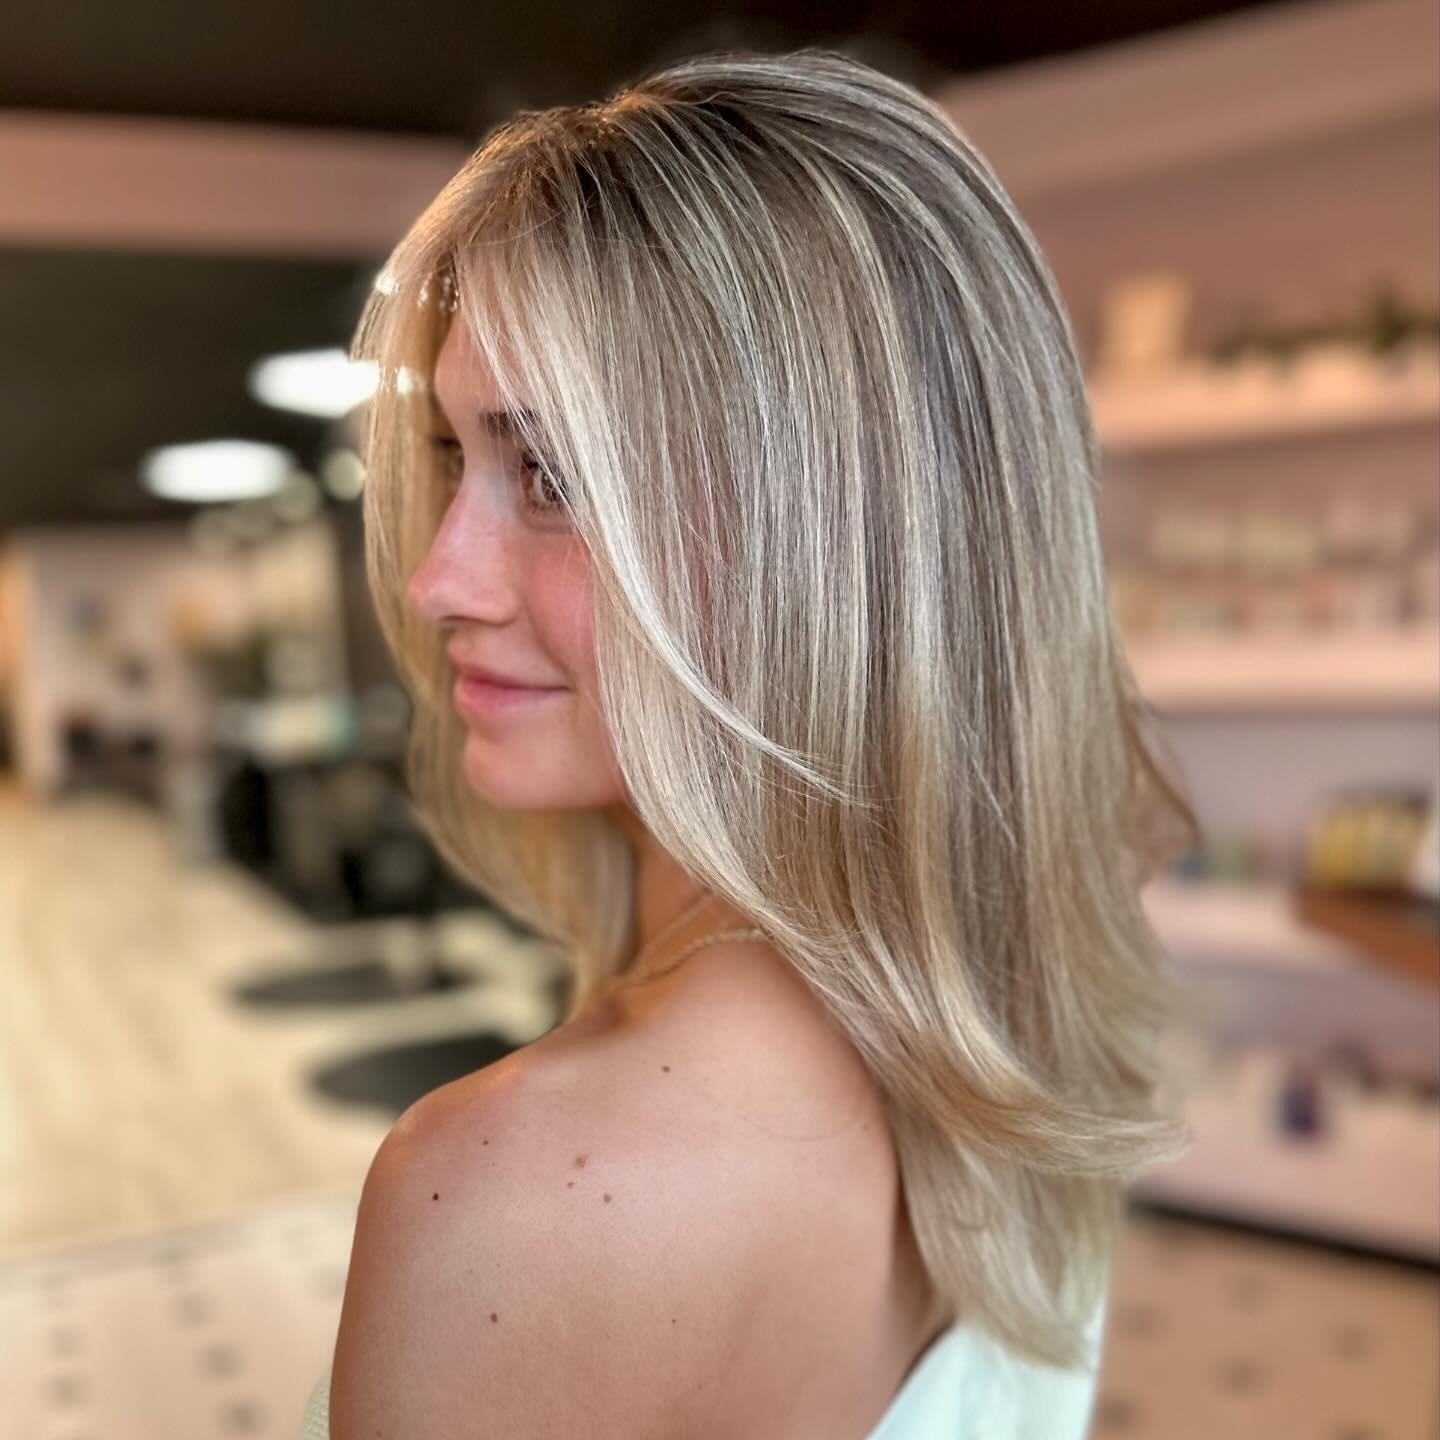 Looking for that blendy vibe?! @rachaelprismhair is your gal! Look at this beautiful creation 😍 we are obsessed. 

Want to book with Rachael? Text or call 8048060604 today!

#rvahair #rvahairsalon #prismglowup #prismhairrva #blendedhighlights #blend